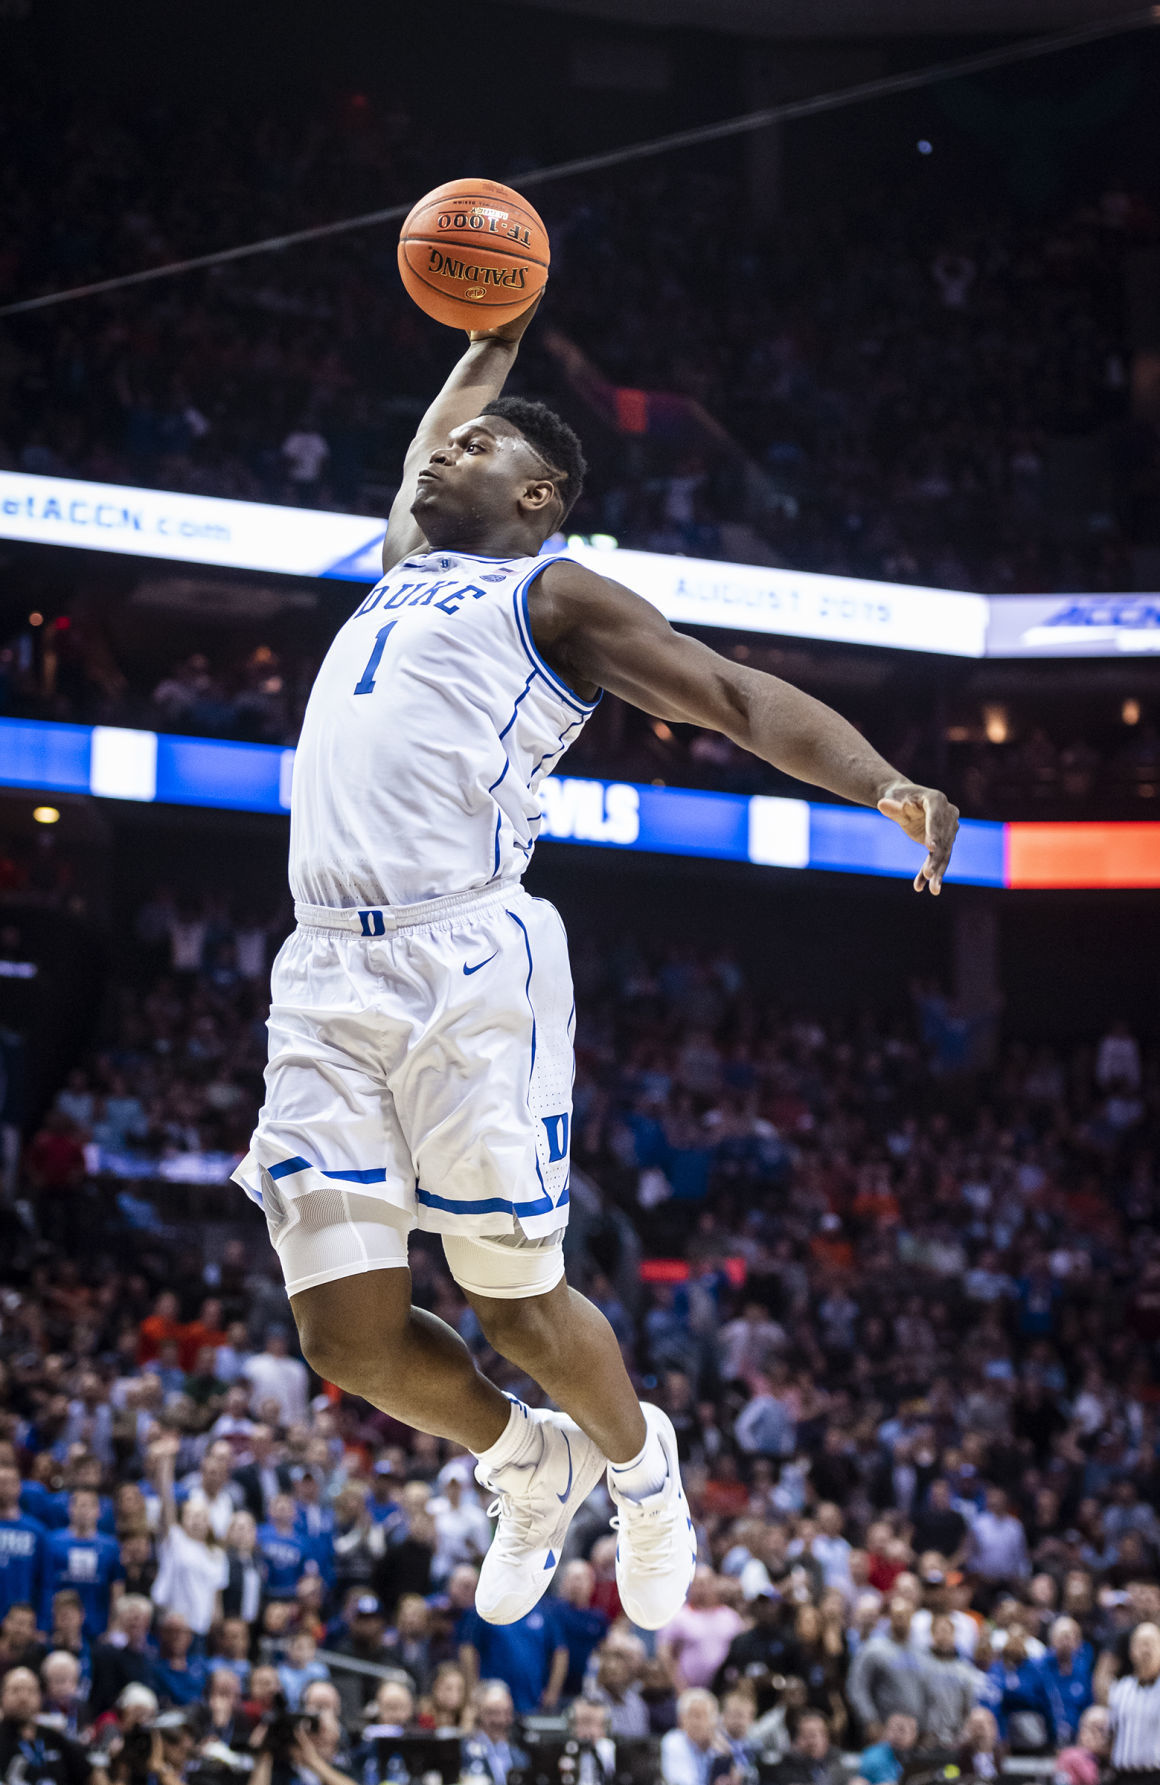 Ed Hardin NCAA Tournament is a new stage for Duke's Zion Williamson